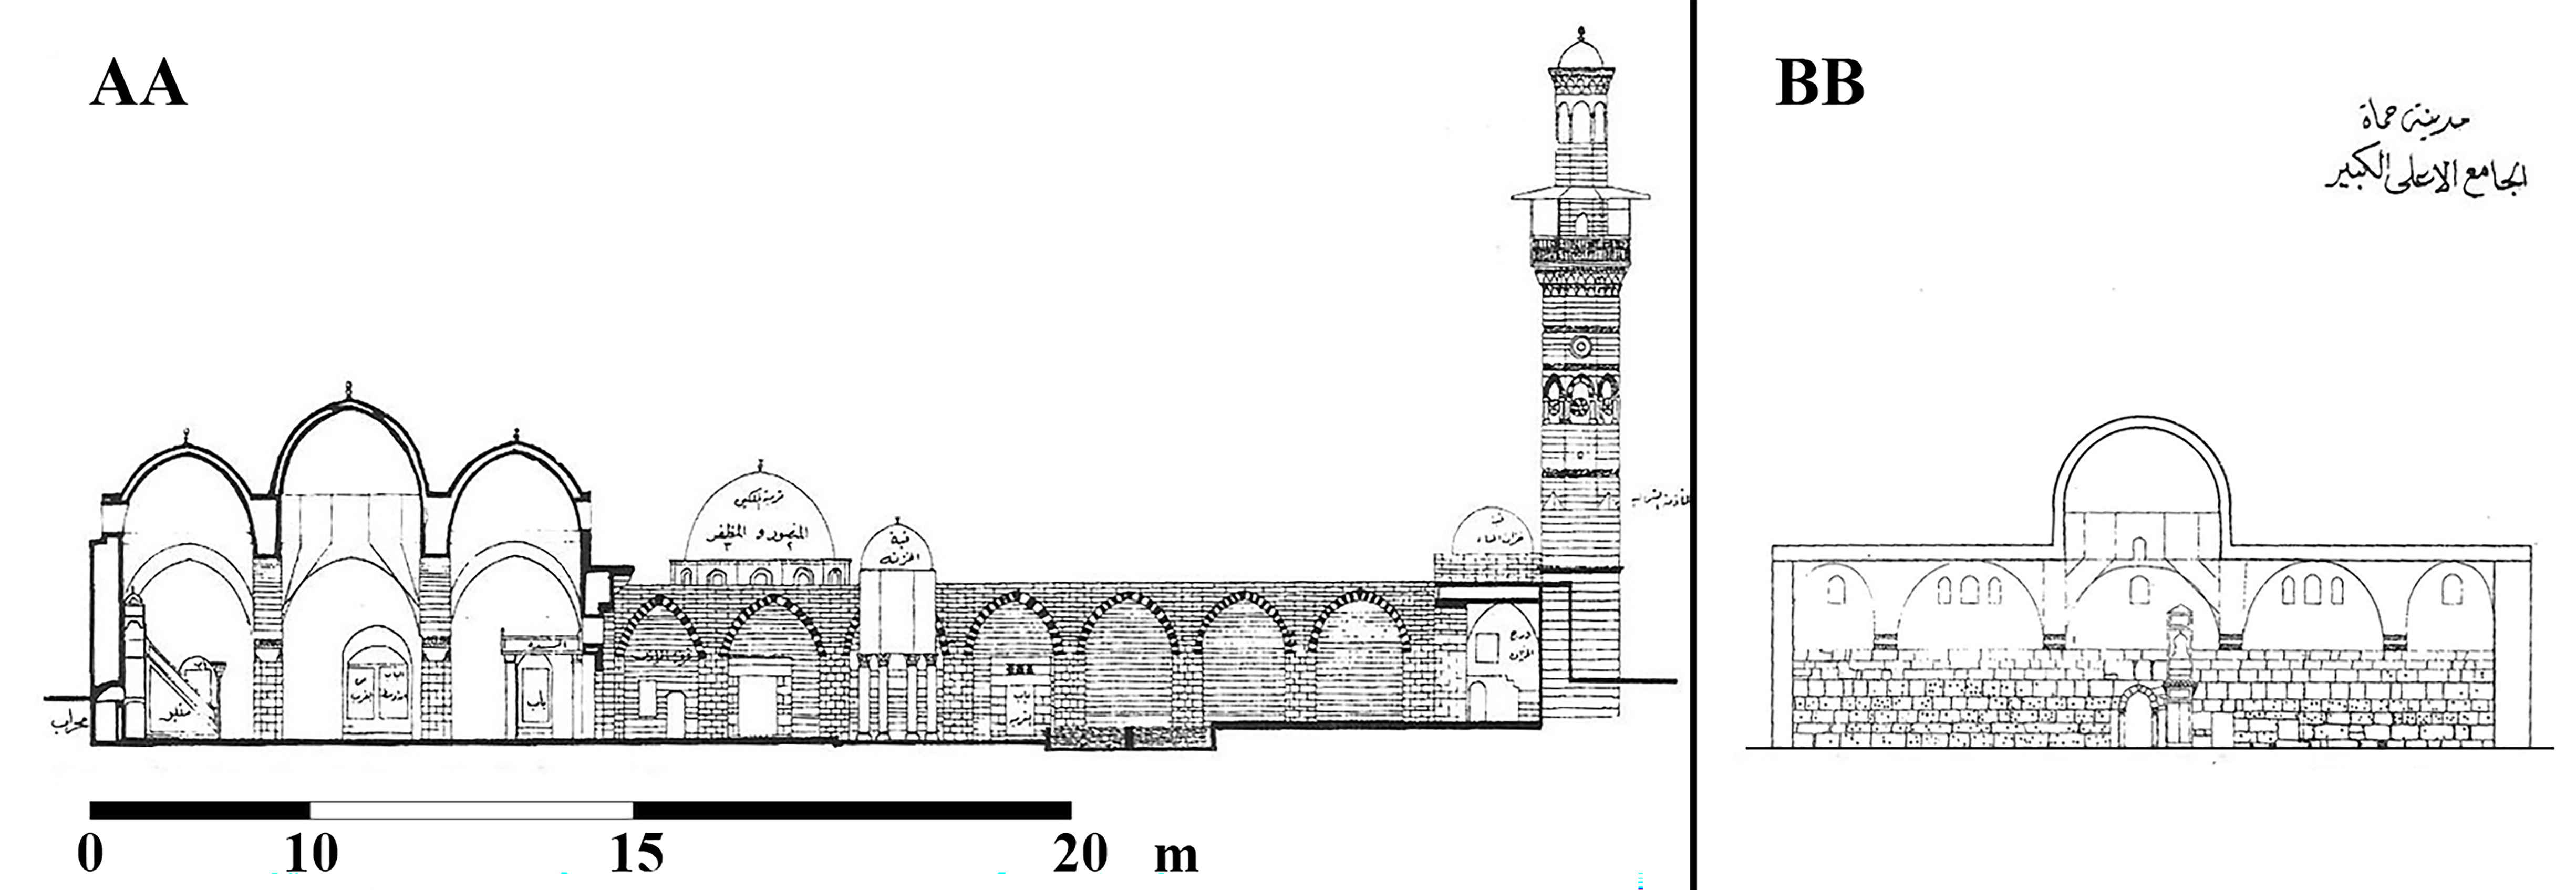 Sections AA and BB in the Prayer Hall of the Upper Mosque [25].